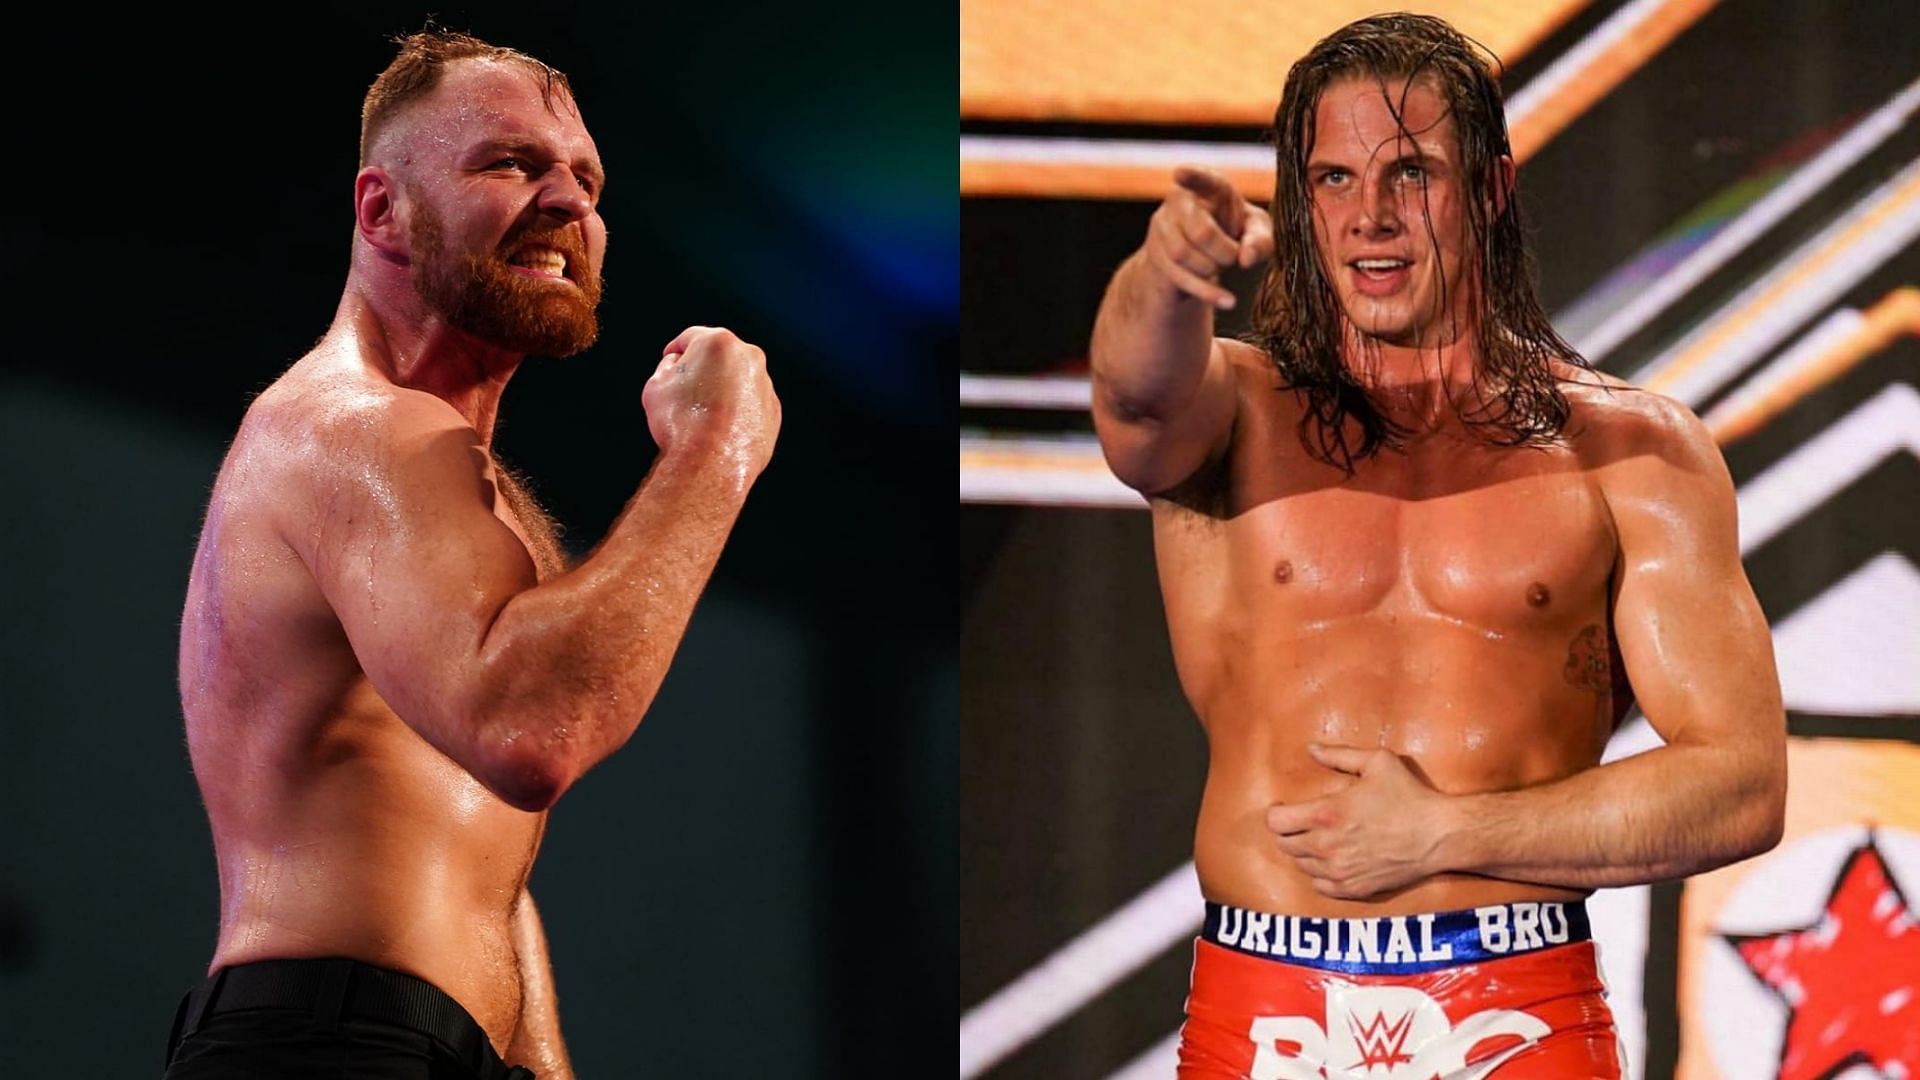 Jon Moxley joined AEW in 2019 before he got a chance to wrestle these WWE Superstars